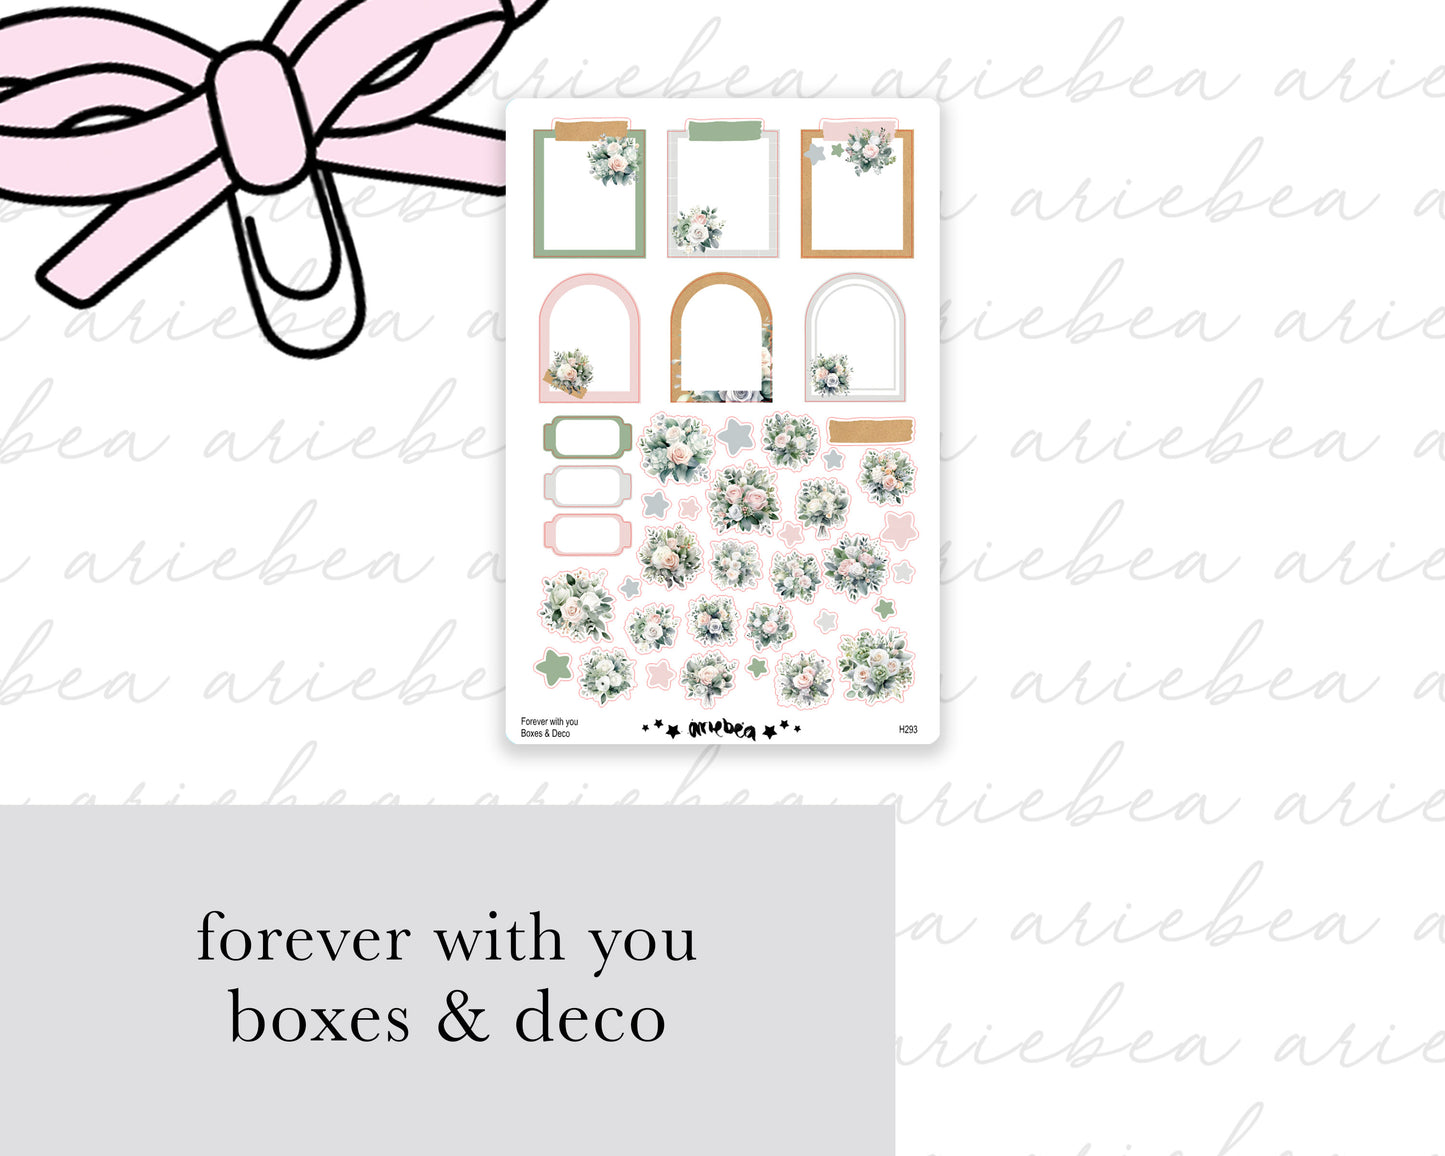 Forever With You Full Mini Kit (4 pages)